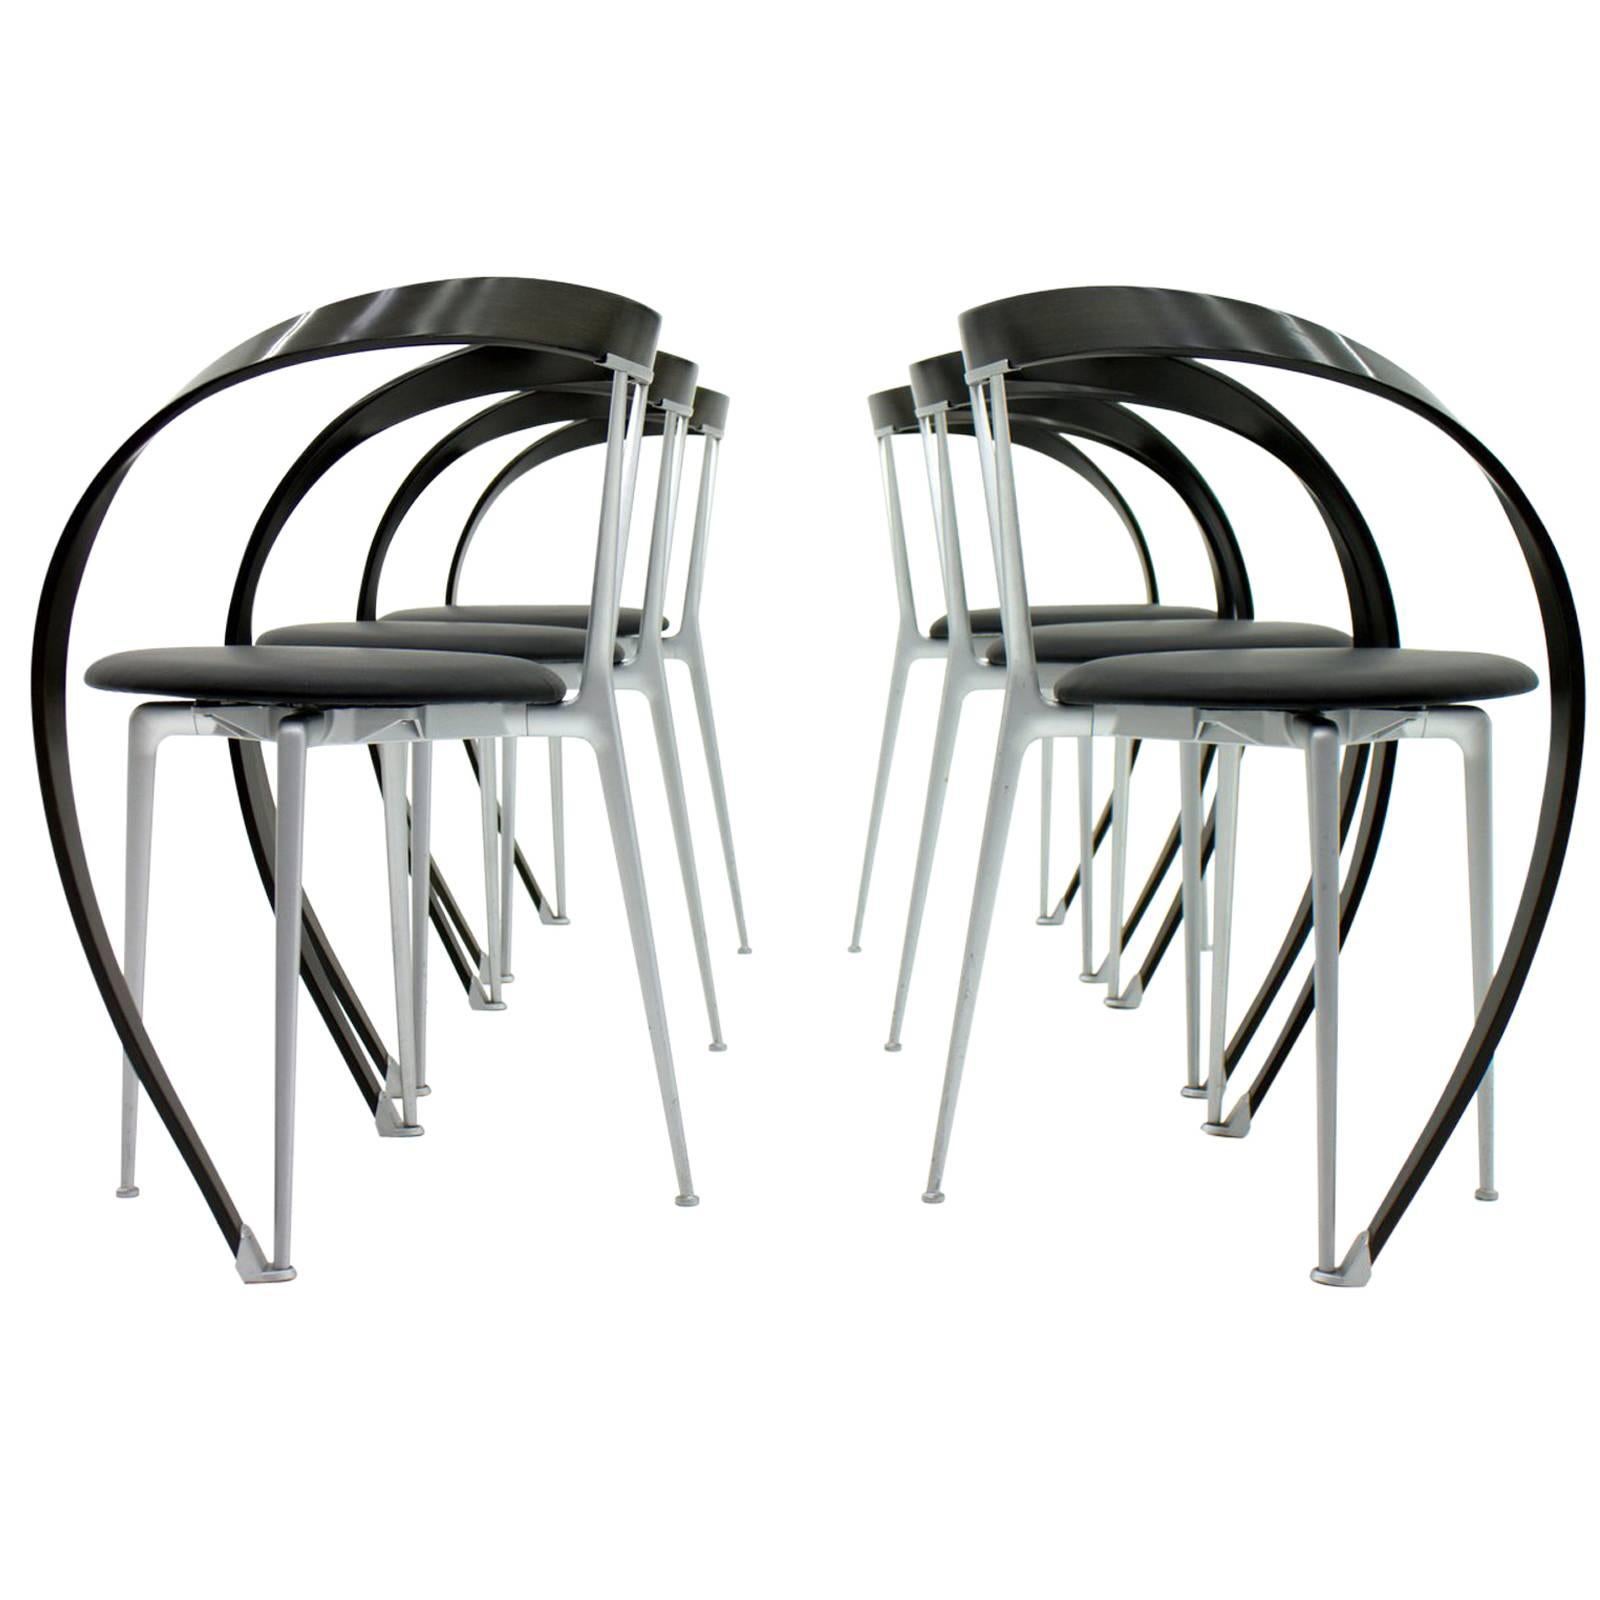 Set of Six Revers Chairs, Andrea Branzi for Cassina, 1993